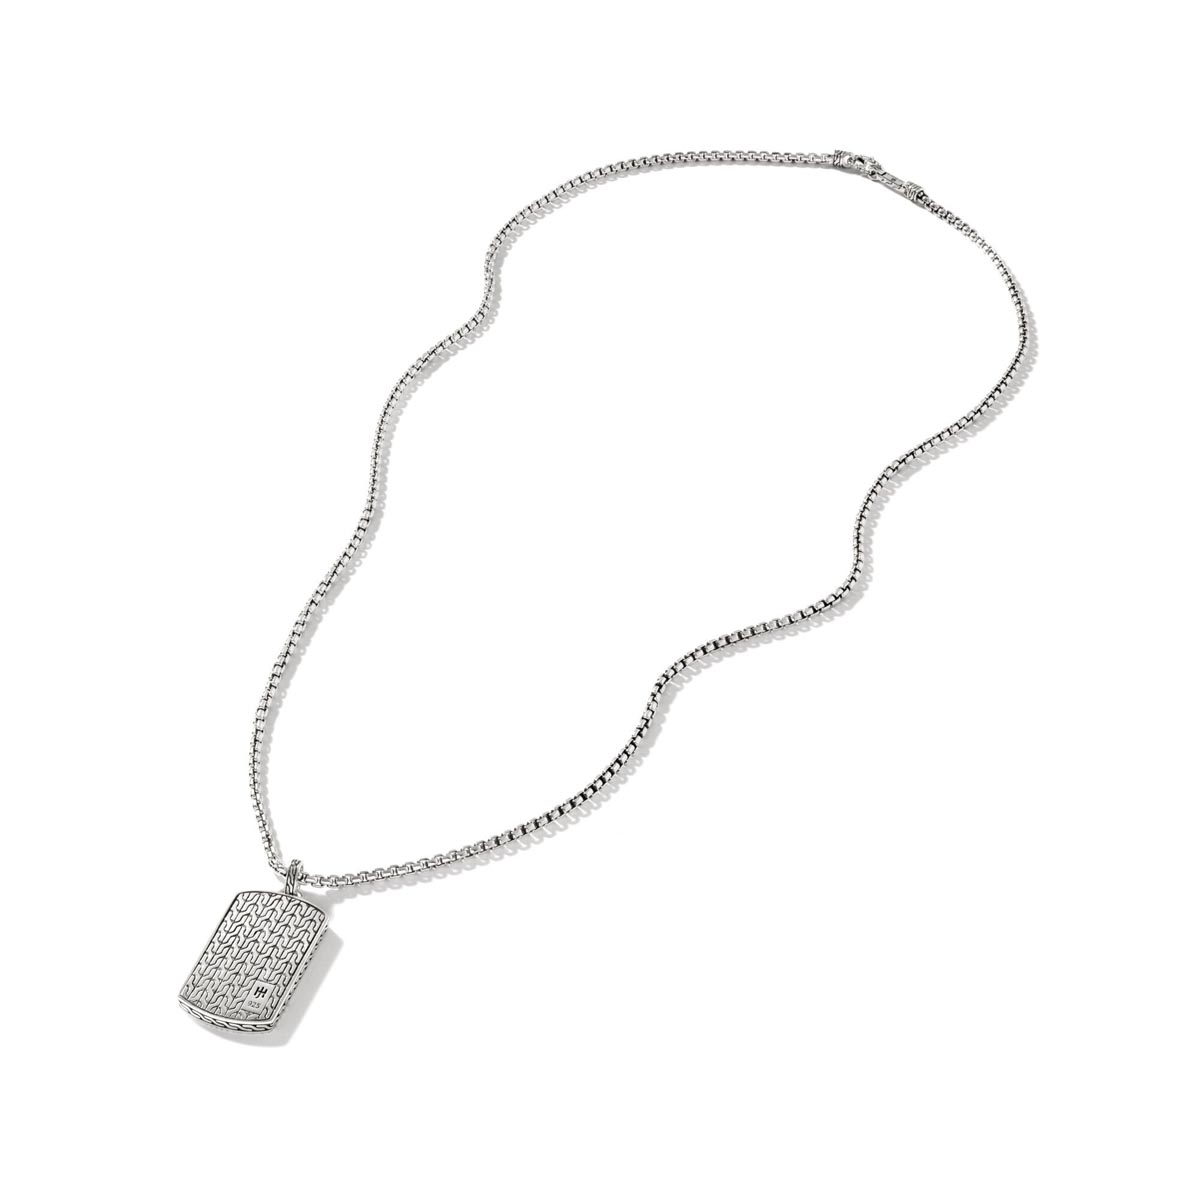 John Hardy Classic Chain Collection Dog Tag Necklace in Sterling Silver